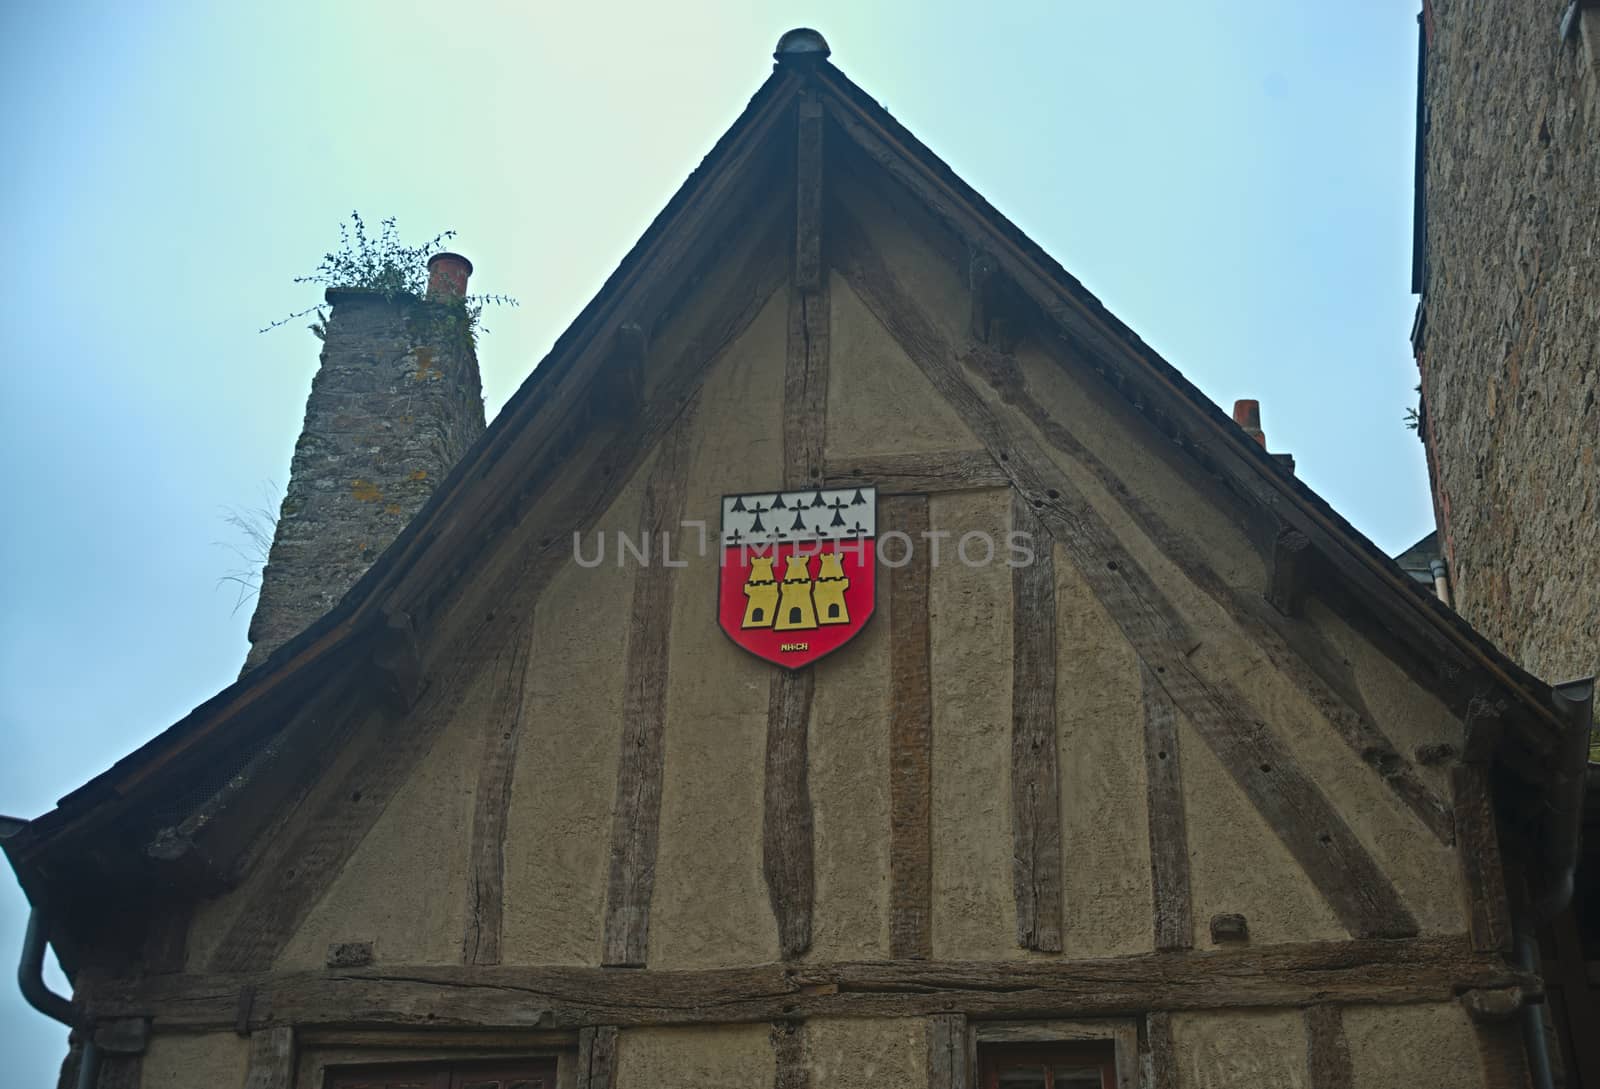 Fully restored old medieval traditional house in Dinan, France by sheriffkule